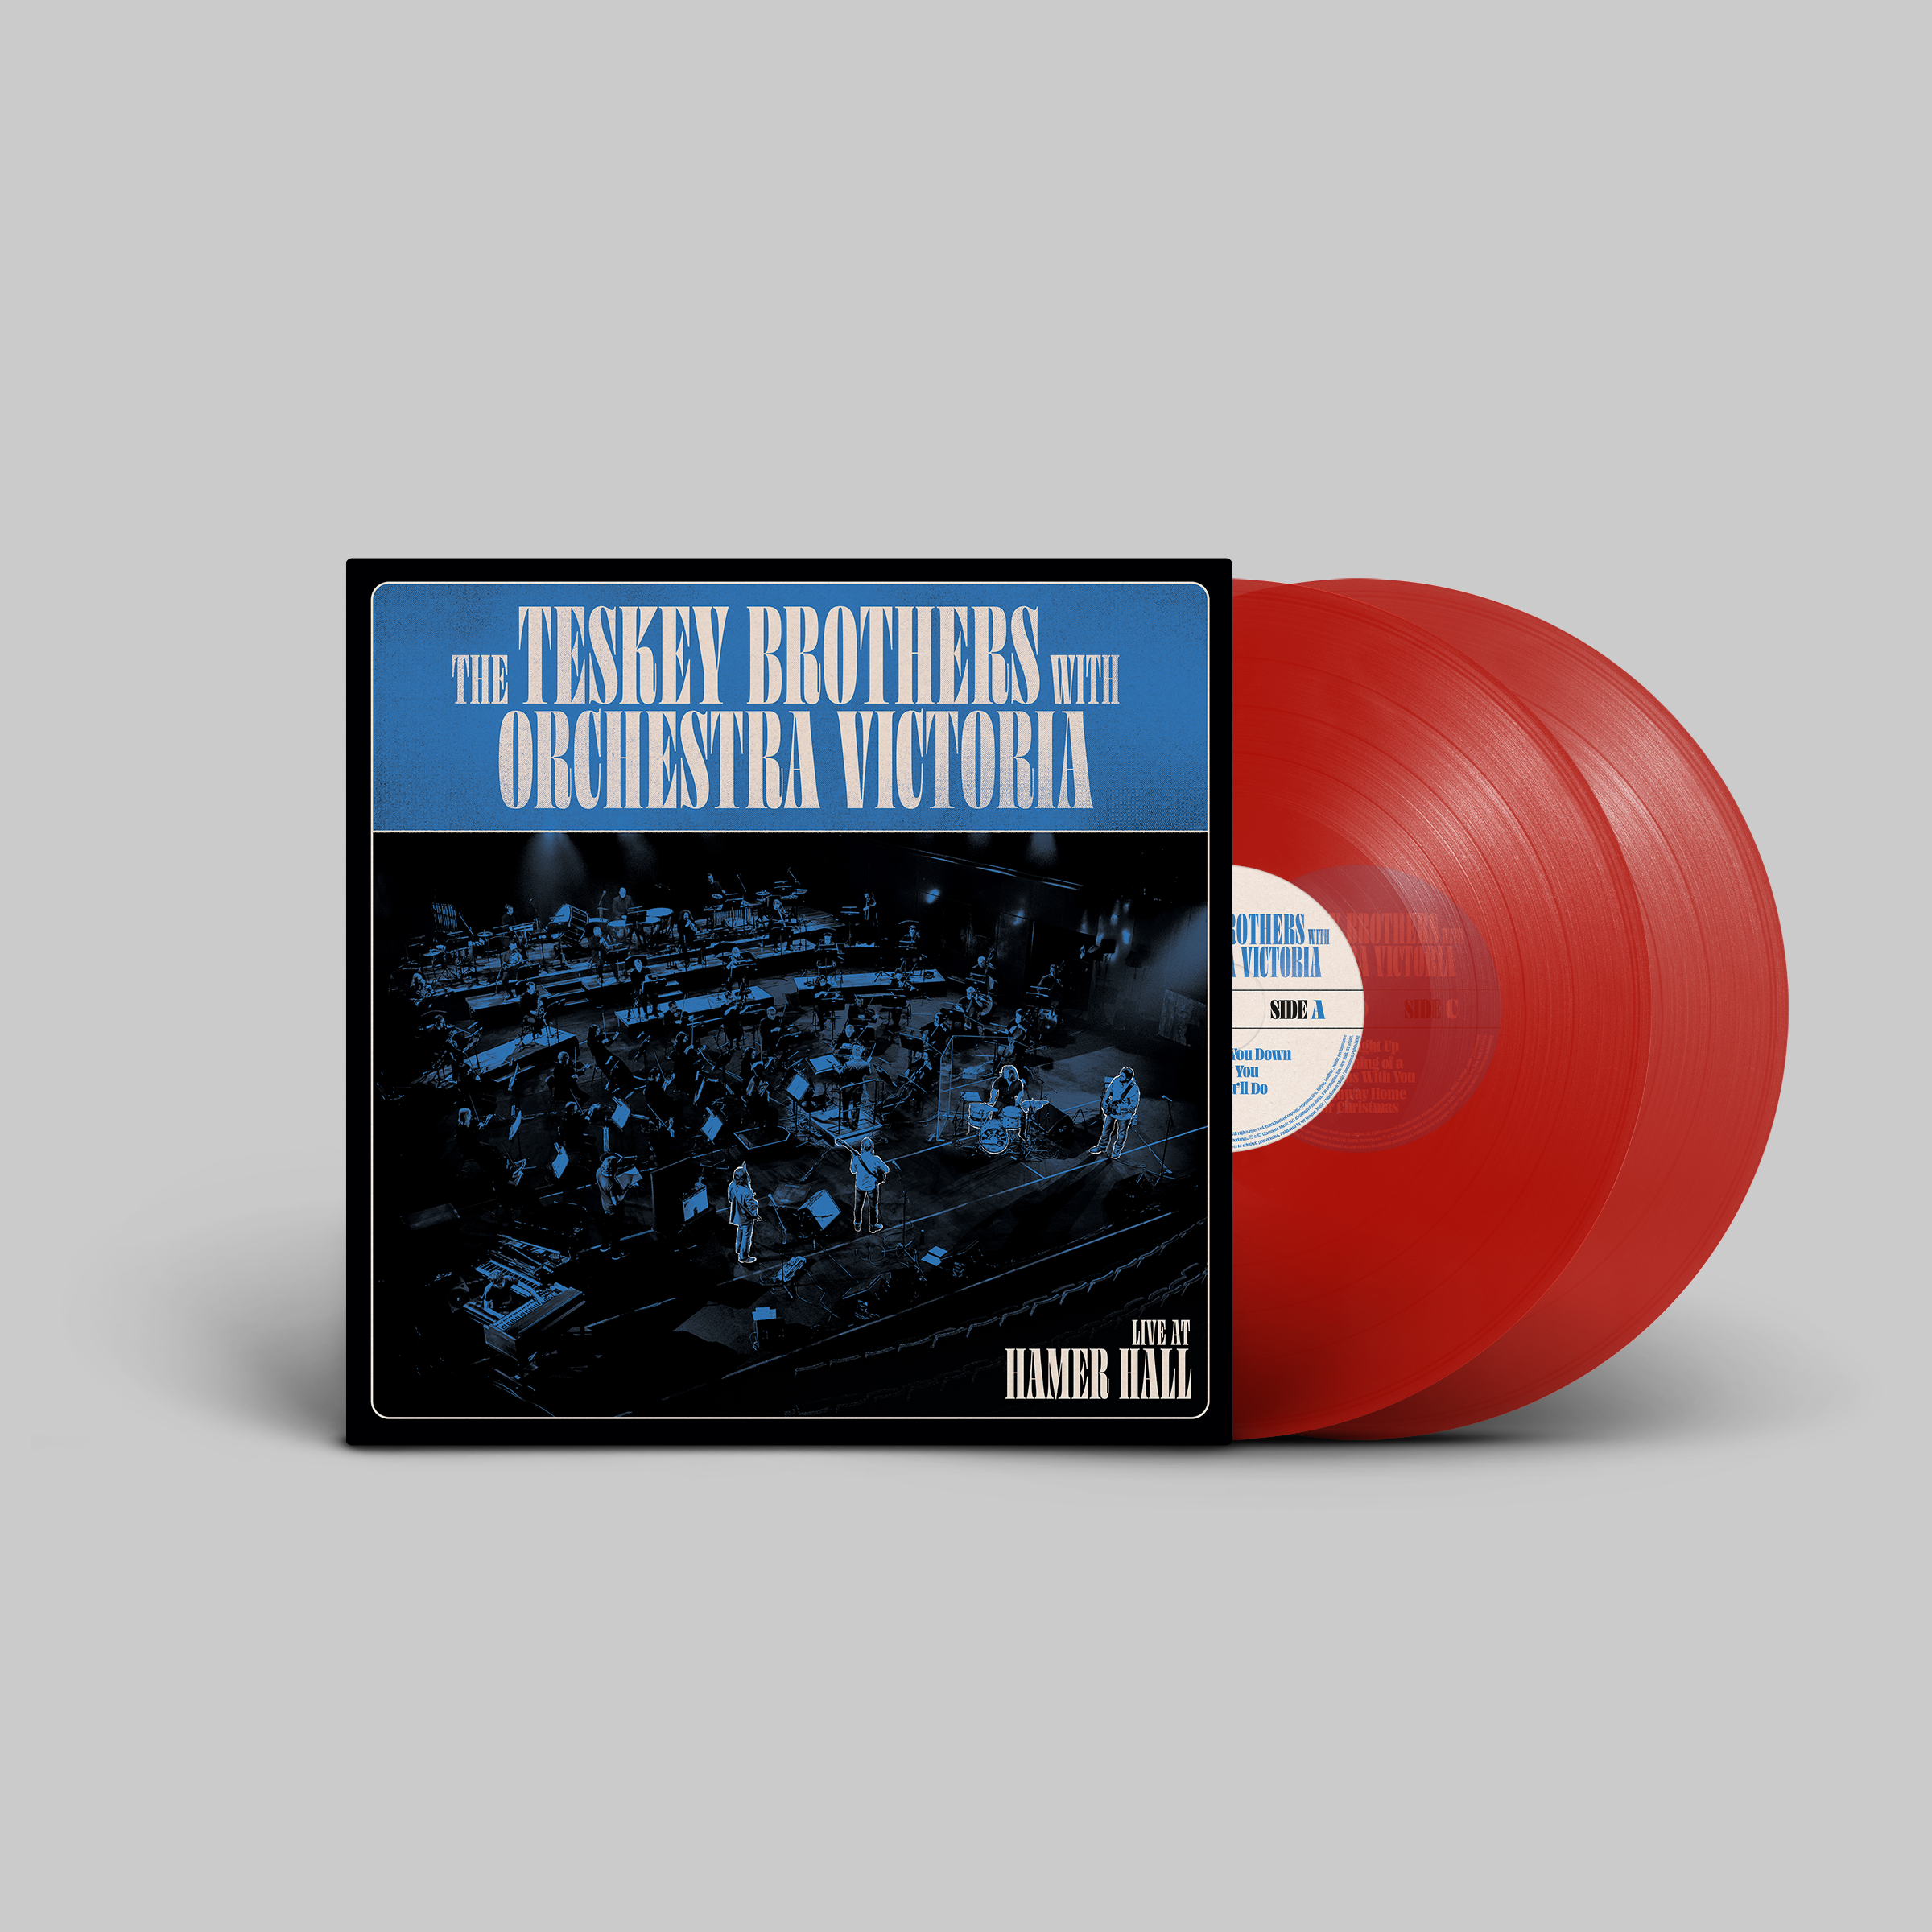 The Teskey Brothers, Orchestra Victoria - Live at Hamer Hall: Red Vinyl 2LP